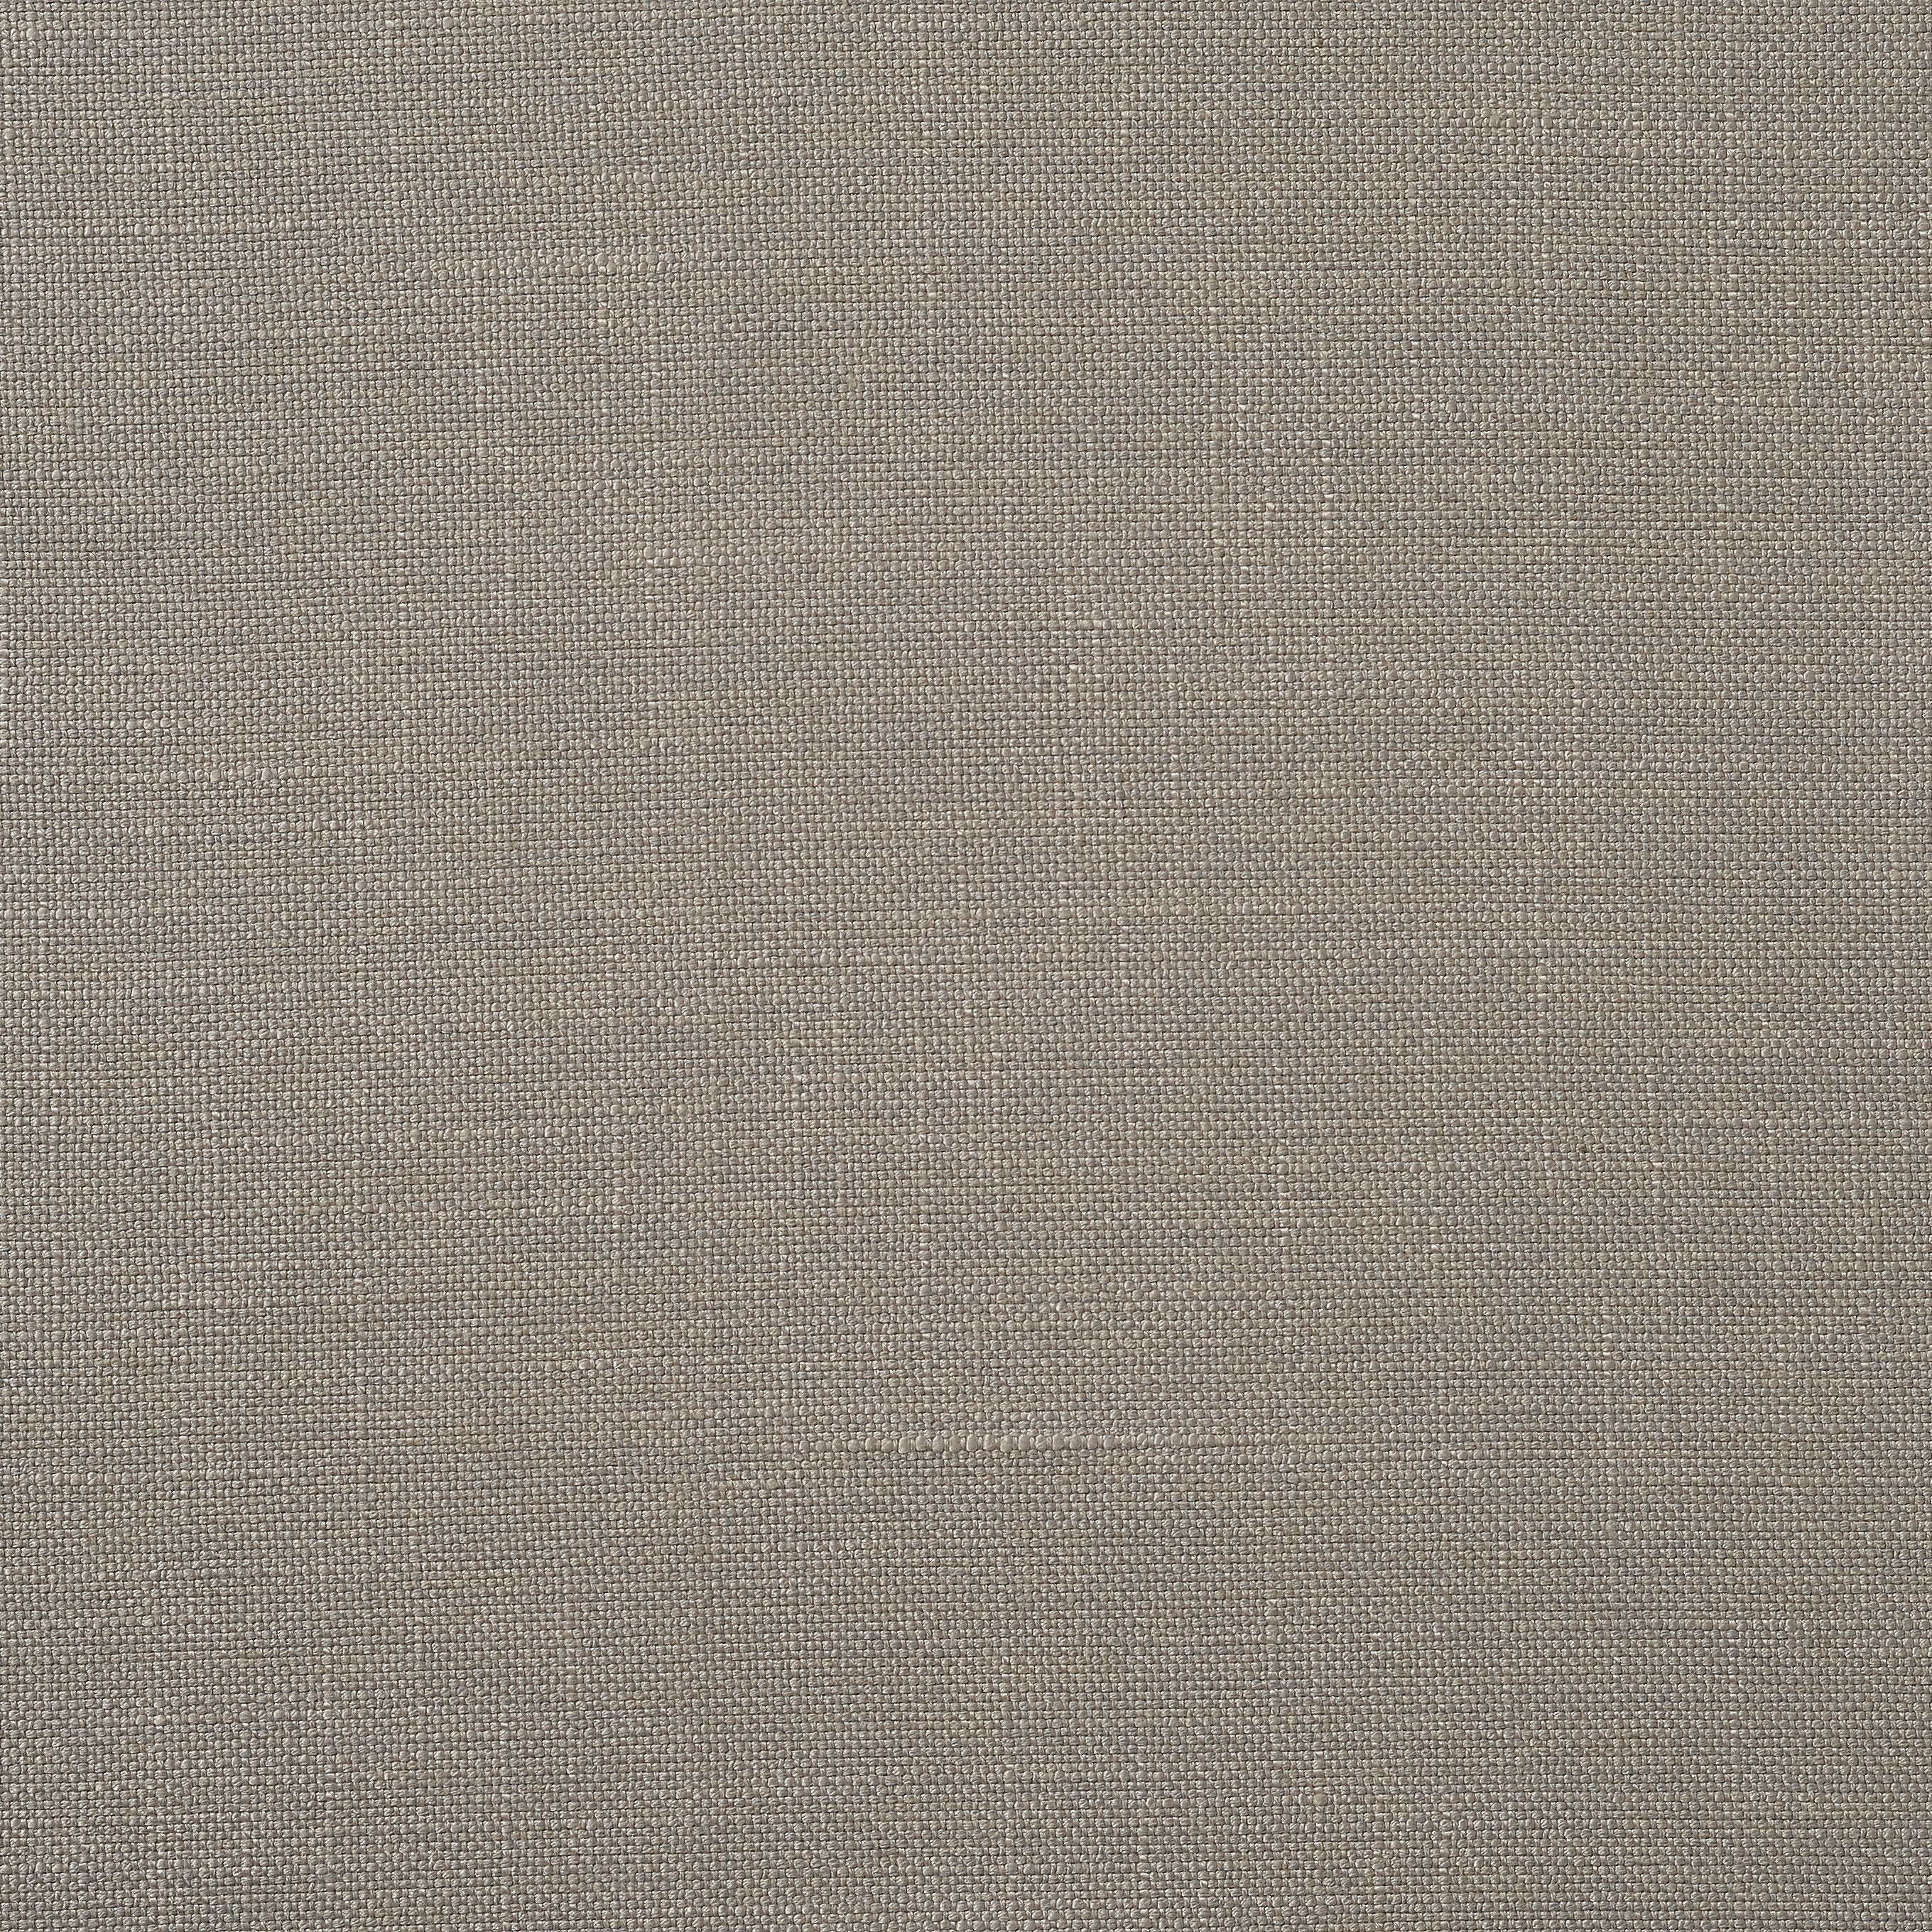 Ashbee House Linen Mix - Stone